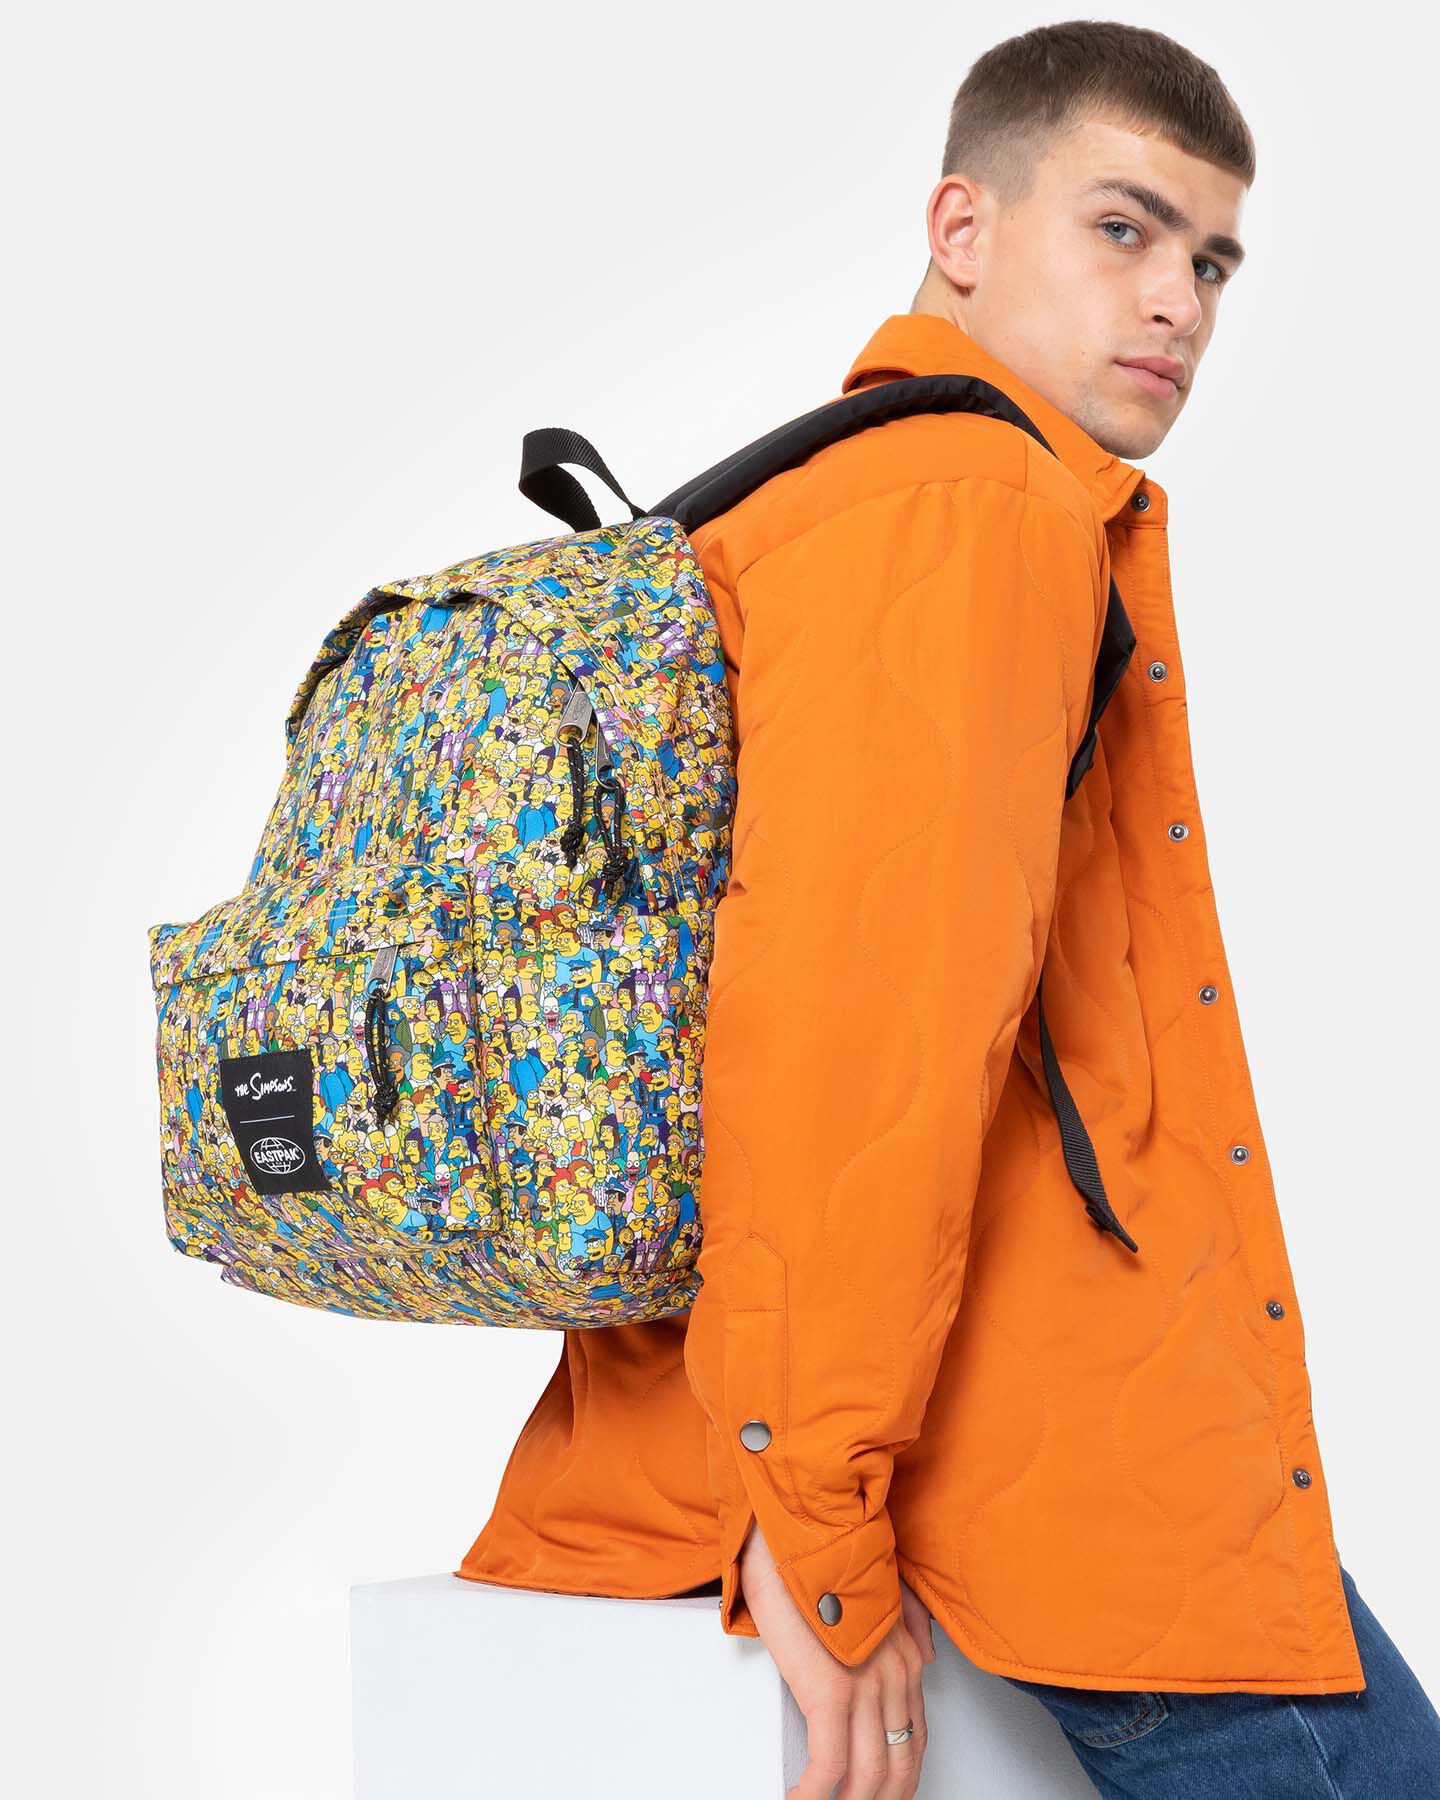  Zaino EASTPAK PADDED PAK'R THE SIMPSONS  S5550522|7A2|OS scatto 1